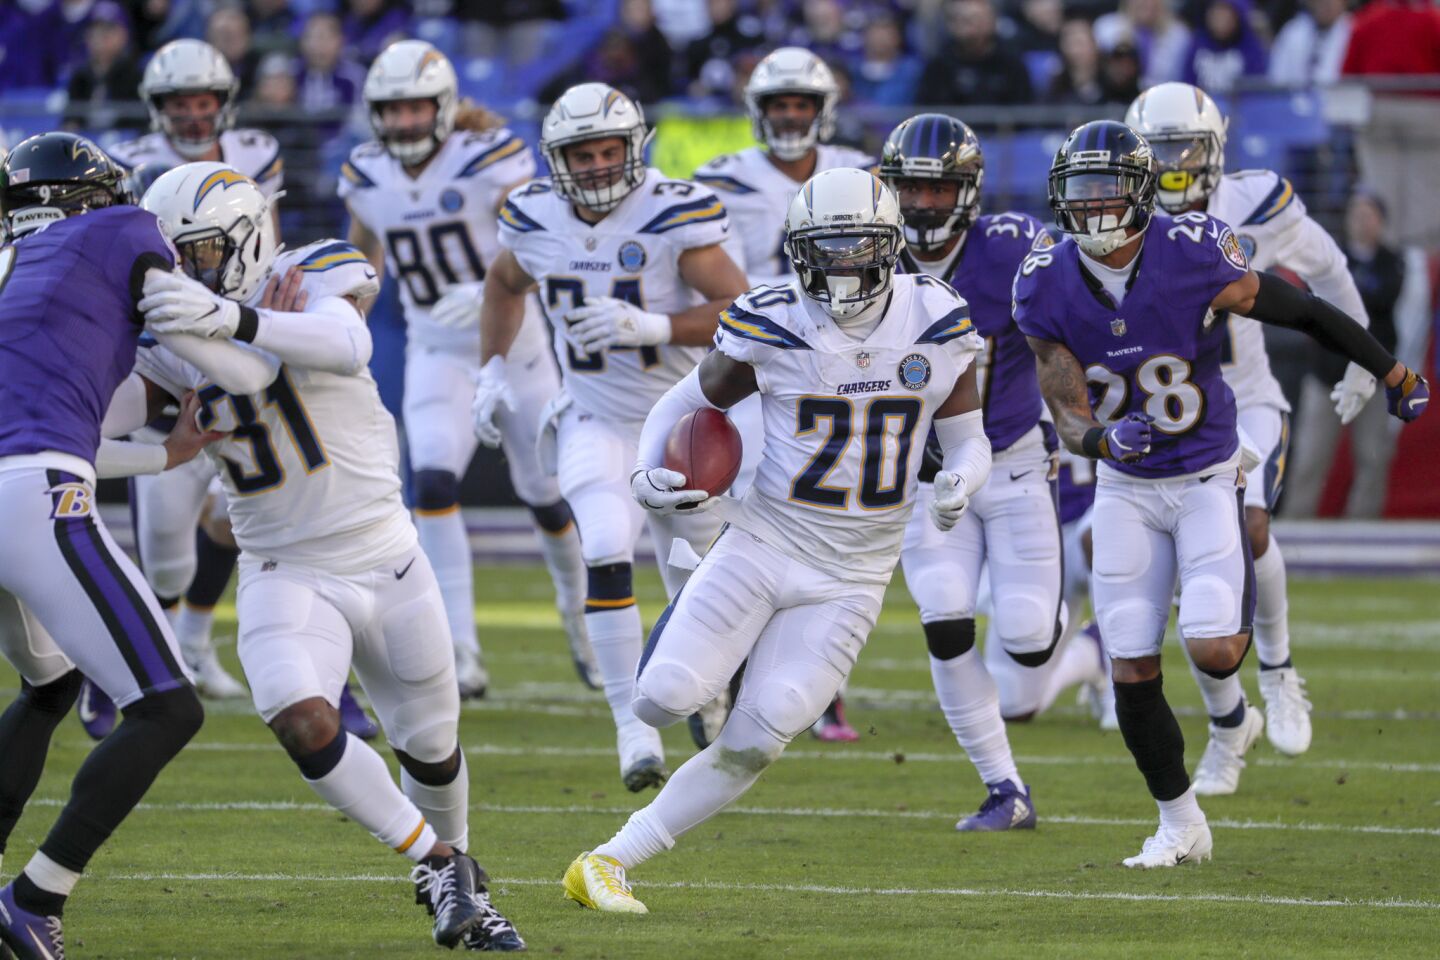 Chargers defensive back Desmond King Jr. breaks free for a 72-yard kickoff return to open the second half.